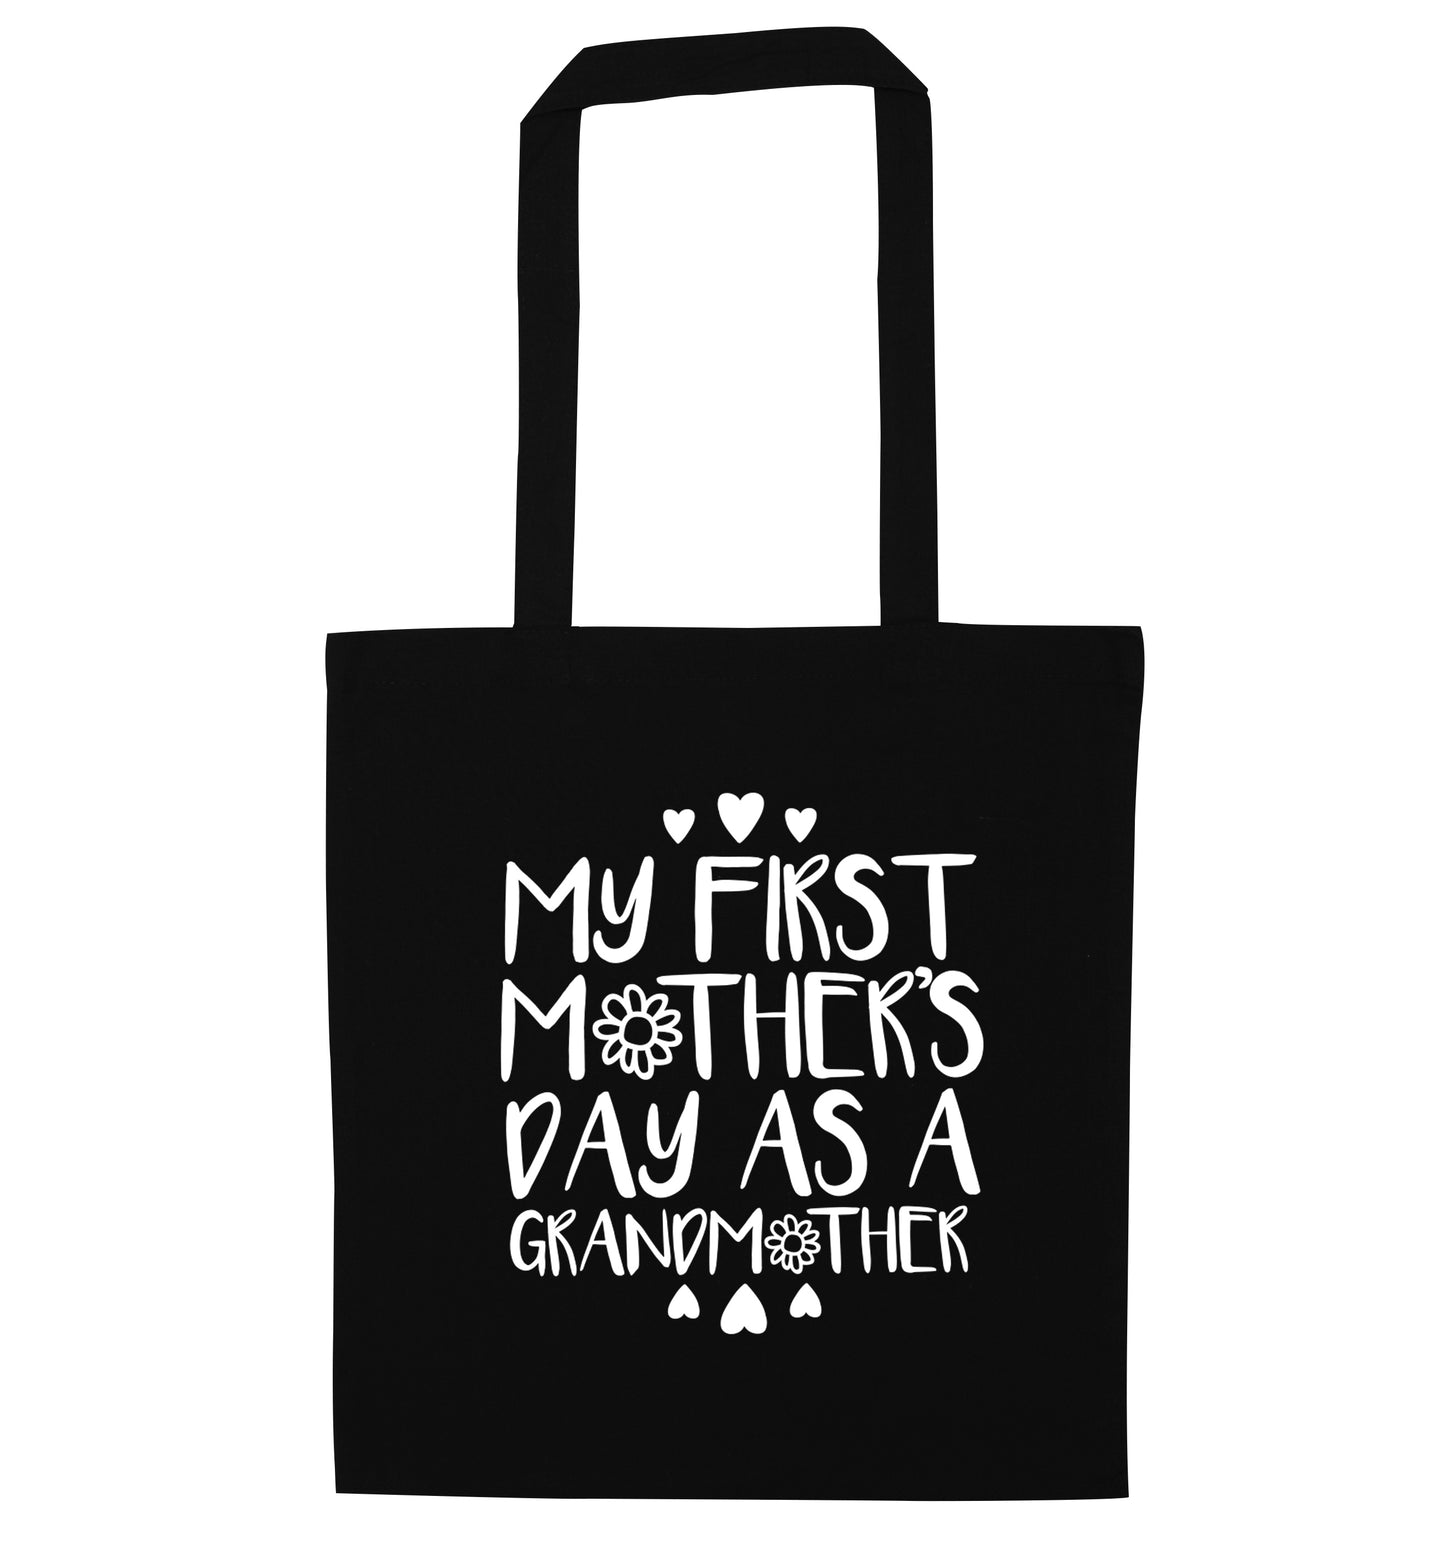 My first mother's day as a grandmother black tote bag